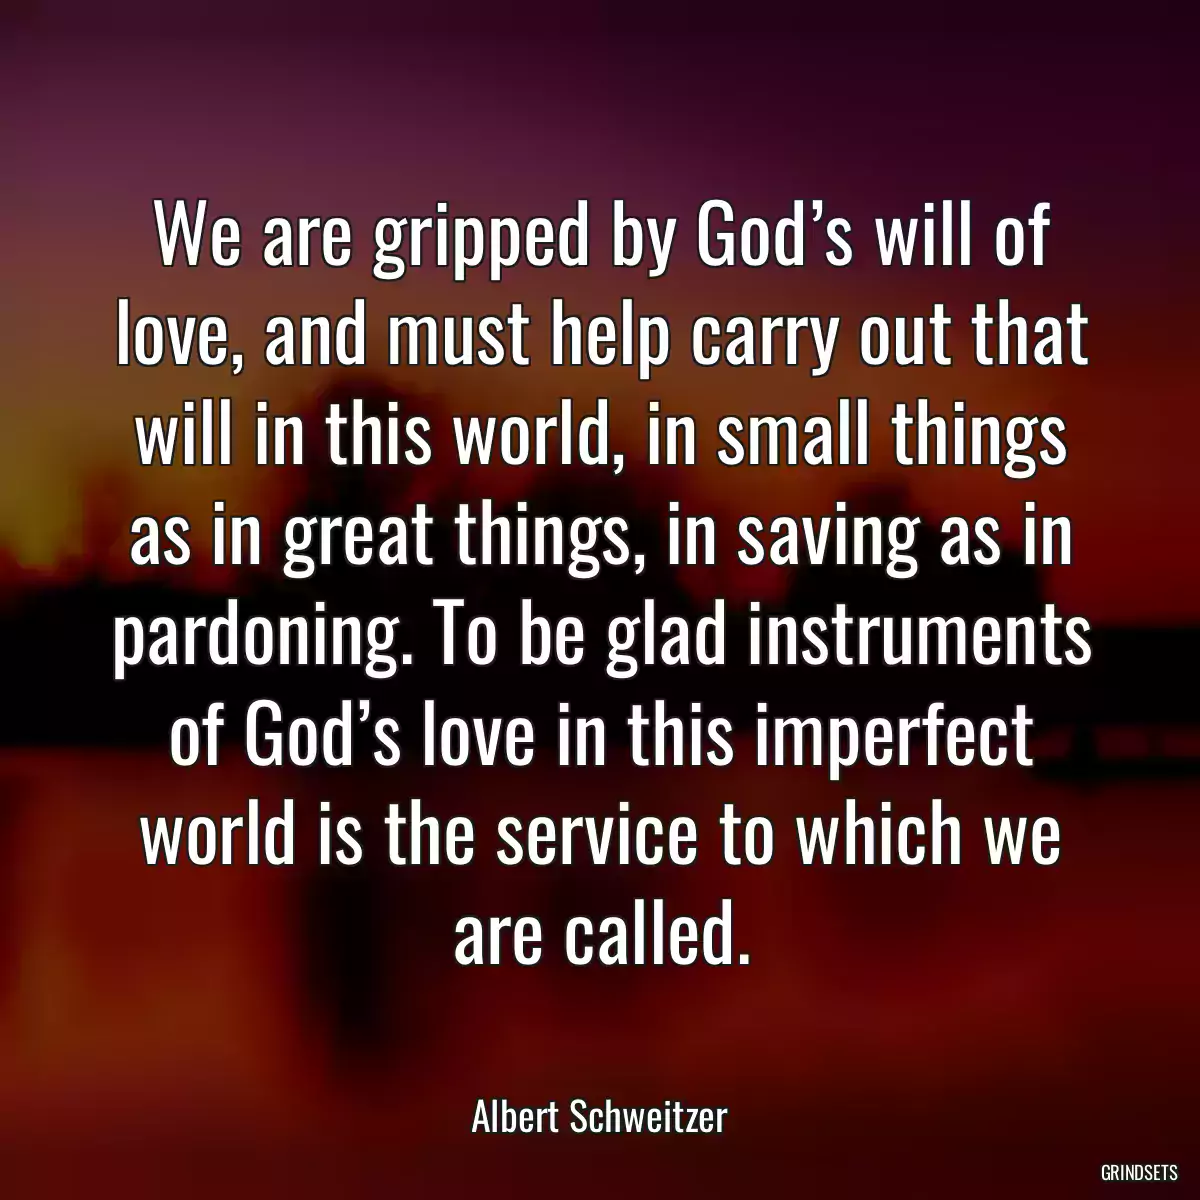 We are gripped by God’s will of love, and must help carry out that will in this world, in small things as in great things, in saving as in pardoning. To be glad instruments of God’s love in this imperfect world is the service to which we are called.